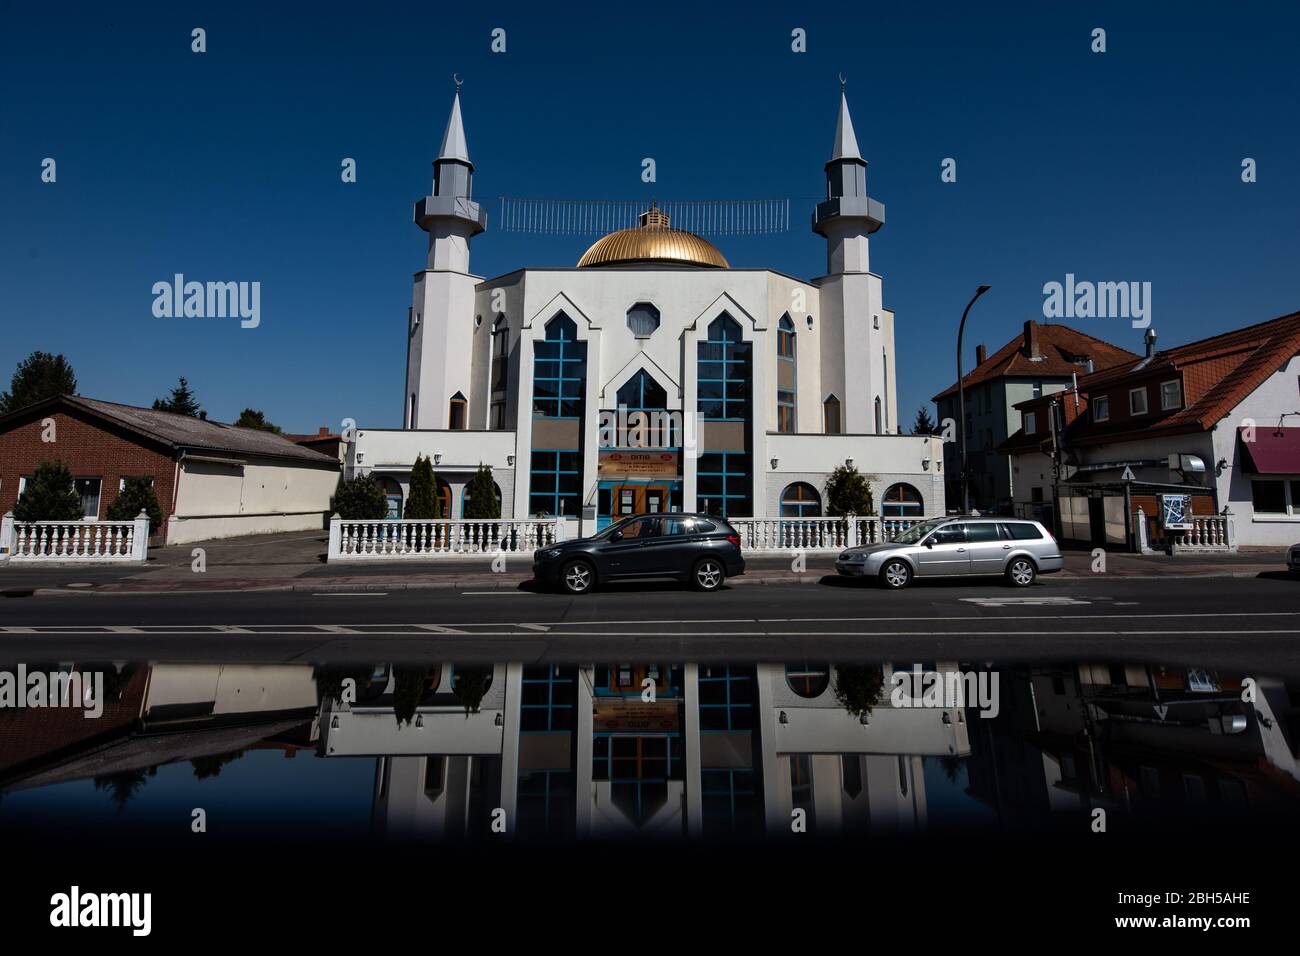 23 April 2020, Lower Saxony, Göttingen: Exterior view of the Turkish Islamic Ditib mosque. The Muslim month of fasting Ramadan begins on 24 April and ends one month later. Faithful Muslims then abstain from food and drink from dawn until sunset. Photo: Swen Pförtner/dpa Stock Photo